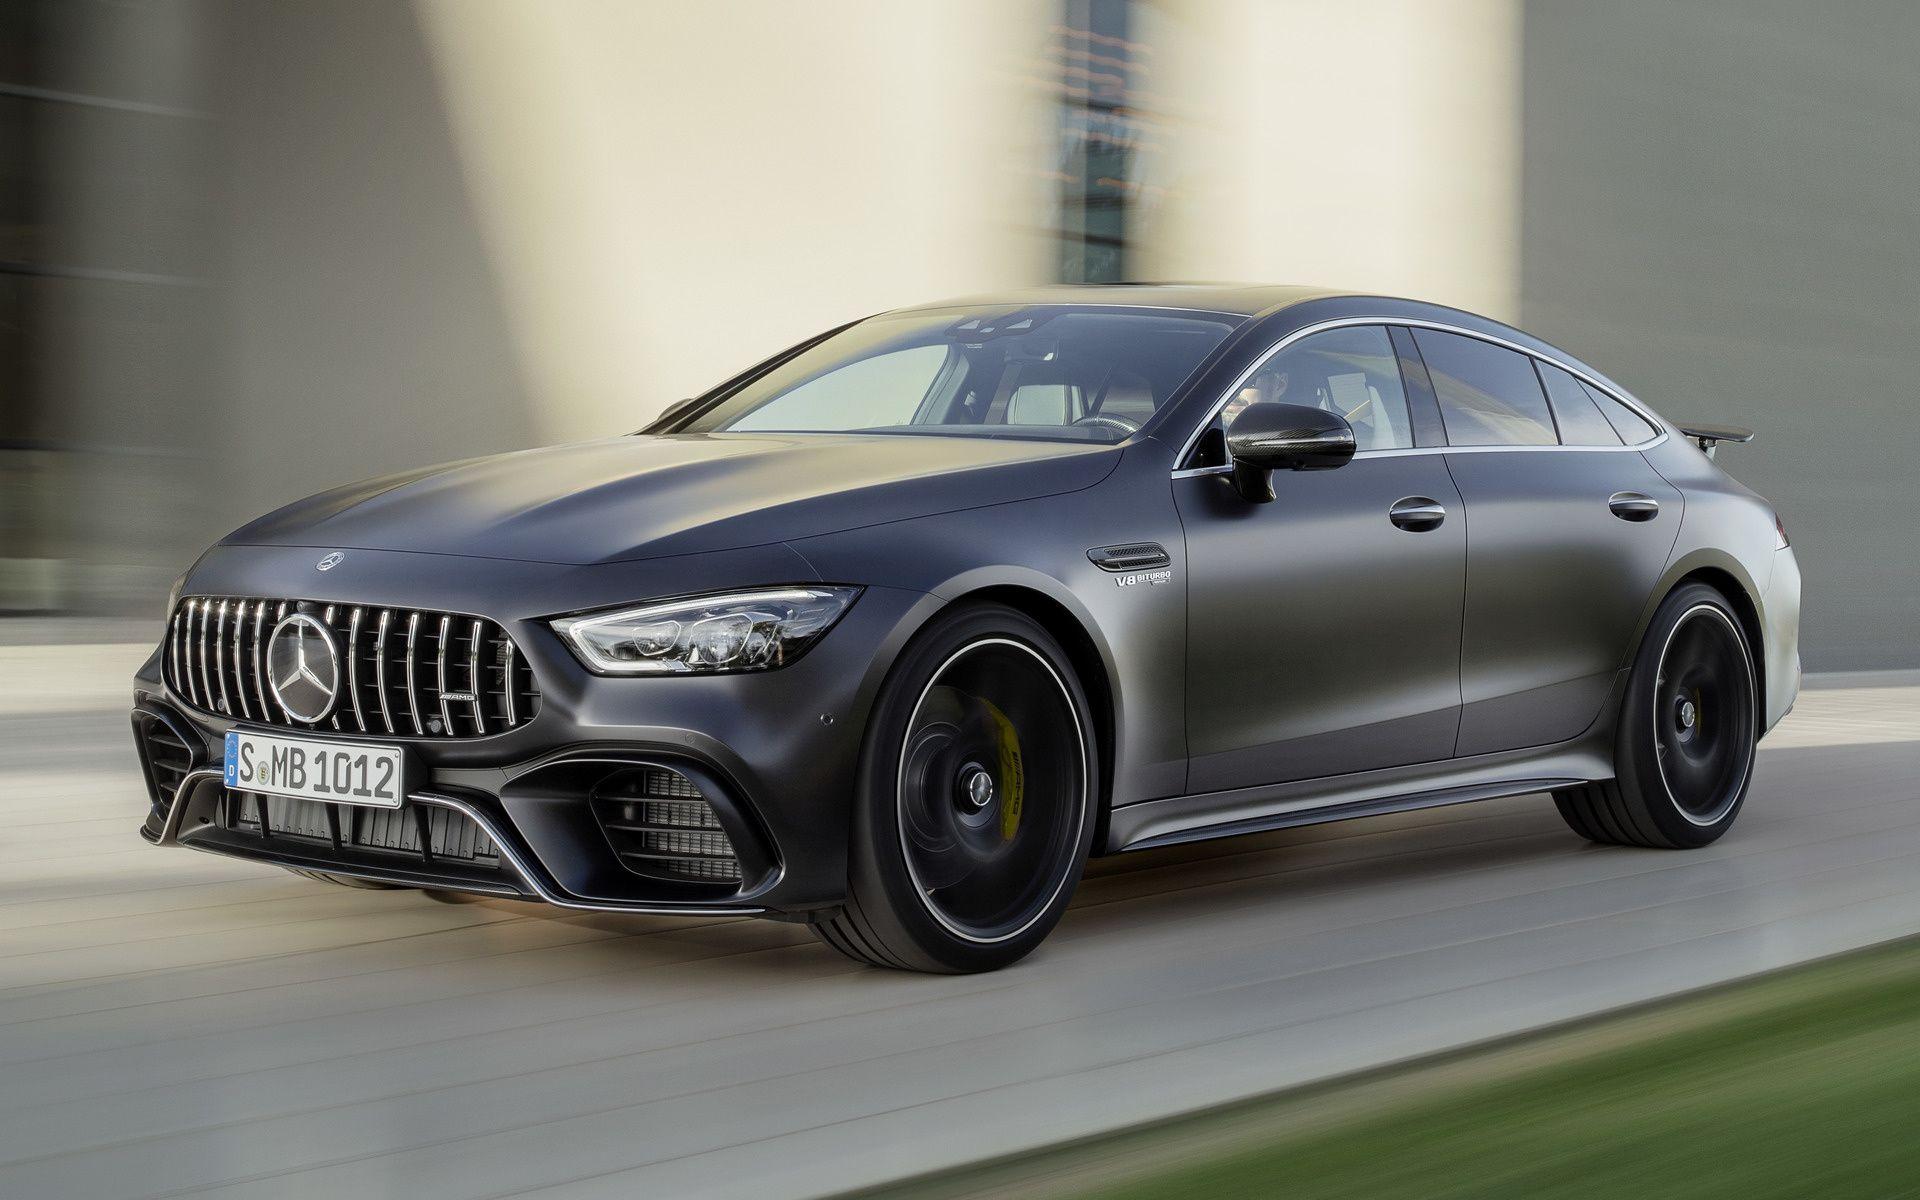 Mercedes AMG GT 63 Wallpapers Top Free Mercedes AMG GT 63 Backgrounds 